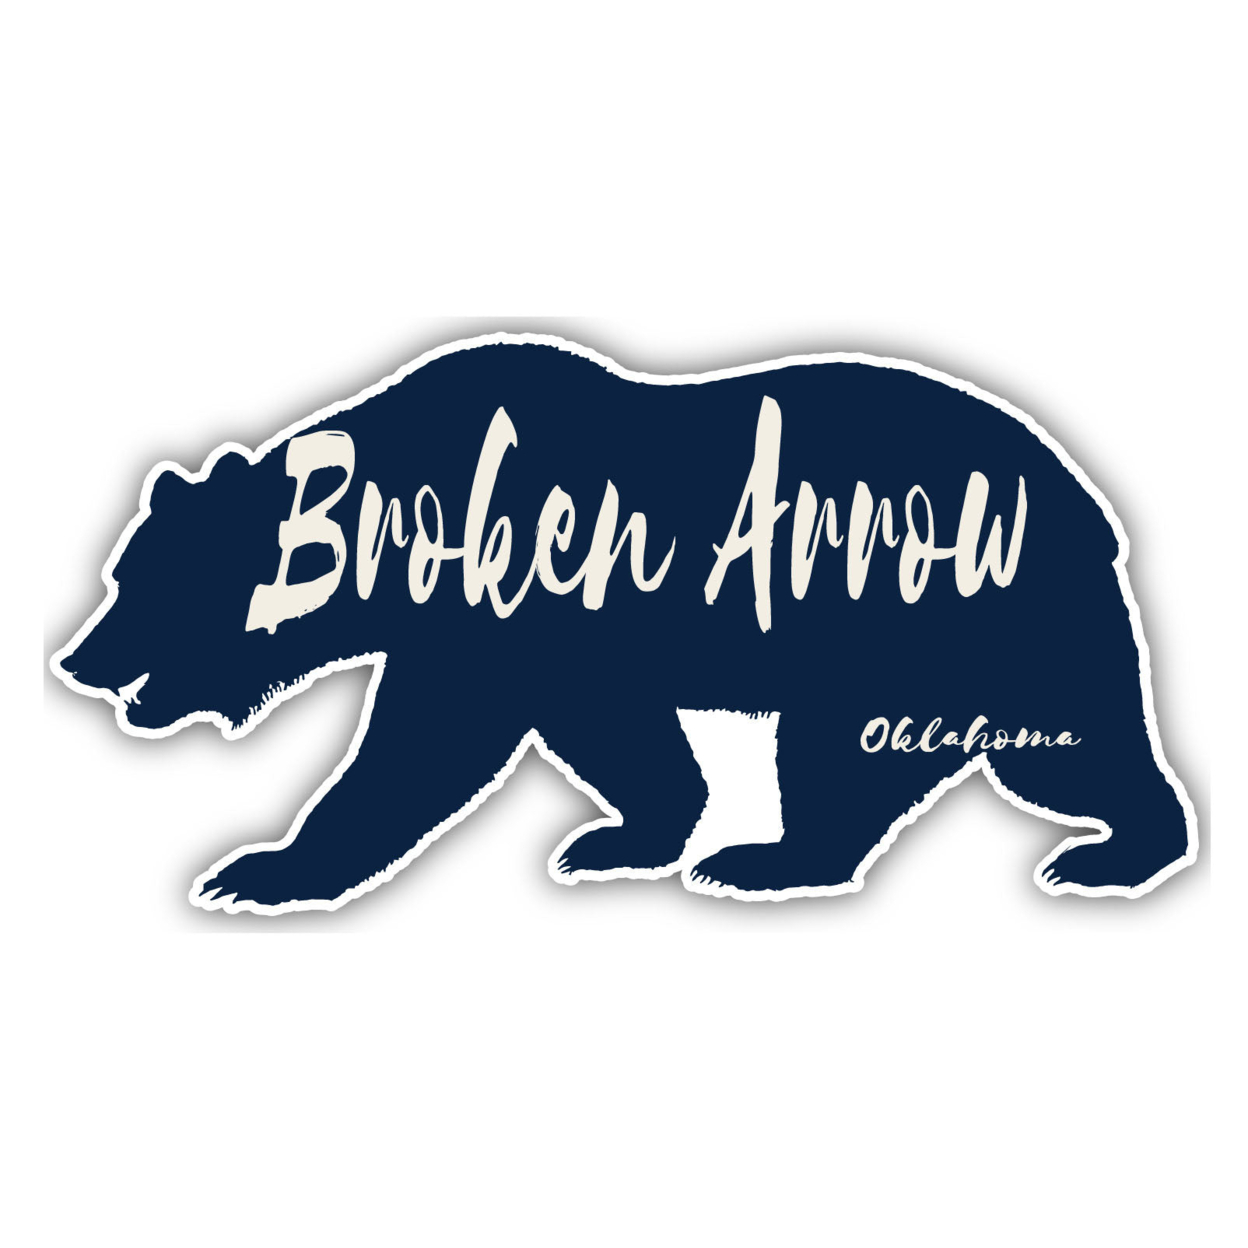 Broken Arrow Oklahoma Souvenir Decorative Stickers (Choose Theme And Size) - 4-Pack, 12-Inch, Great Outdoors